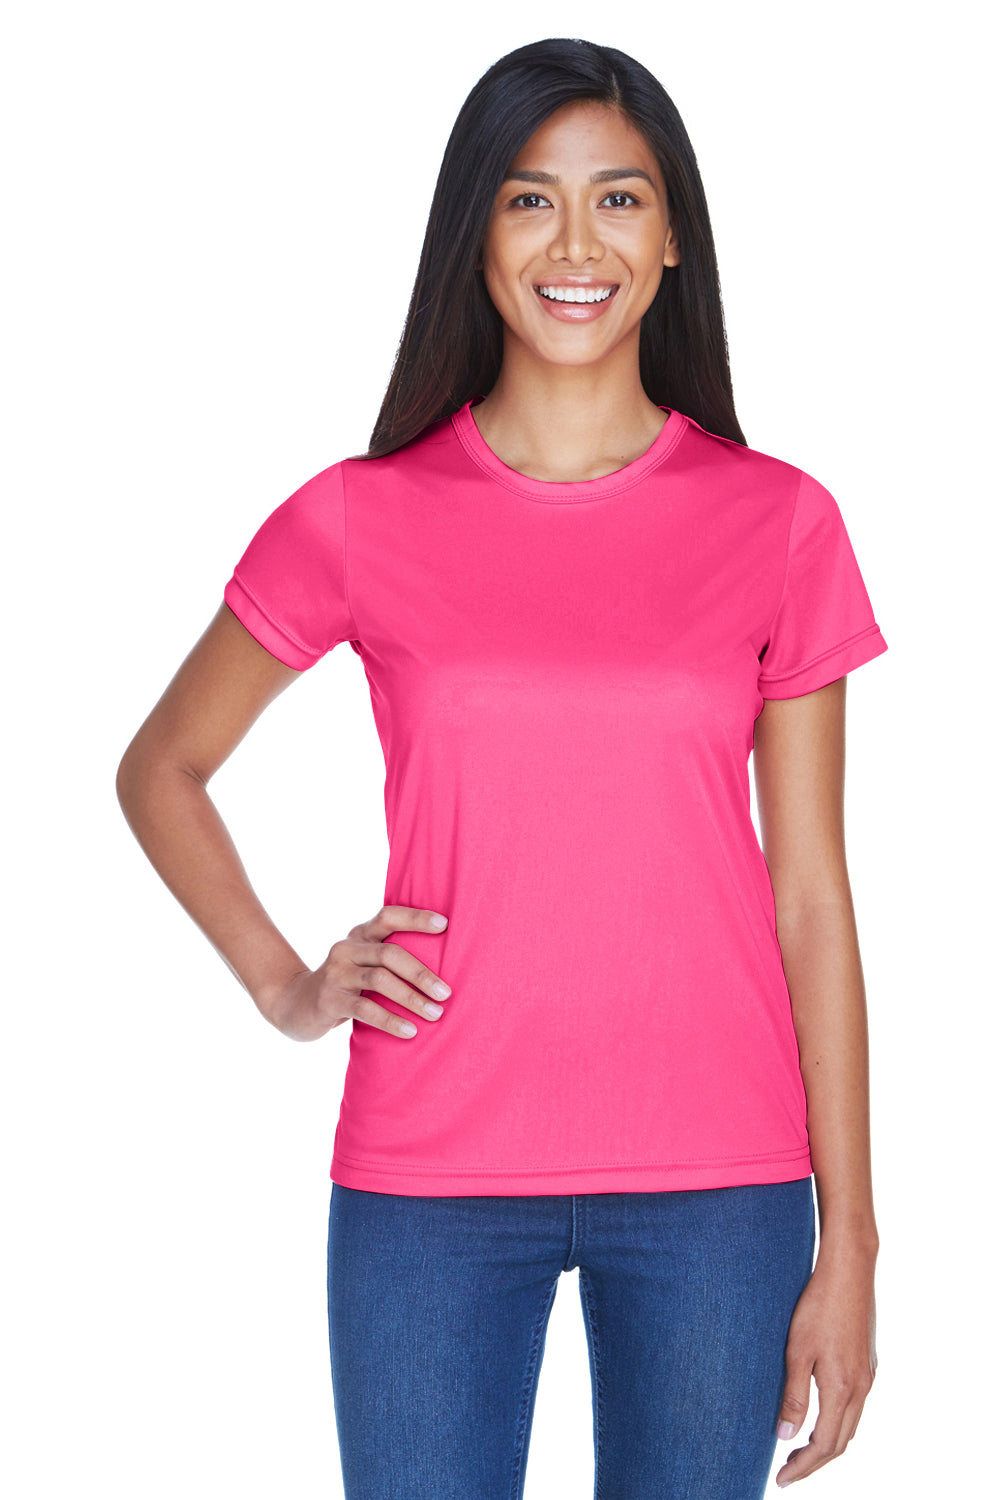 UltraClub 8420L Womens Cool & Dry Performance Moisture Wicking Short Sleeve Crewneck T-Shirt Heliconia Pink Front